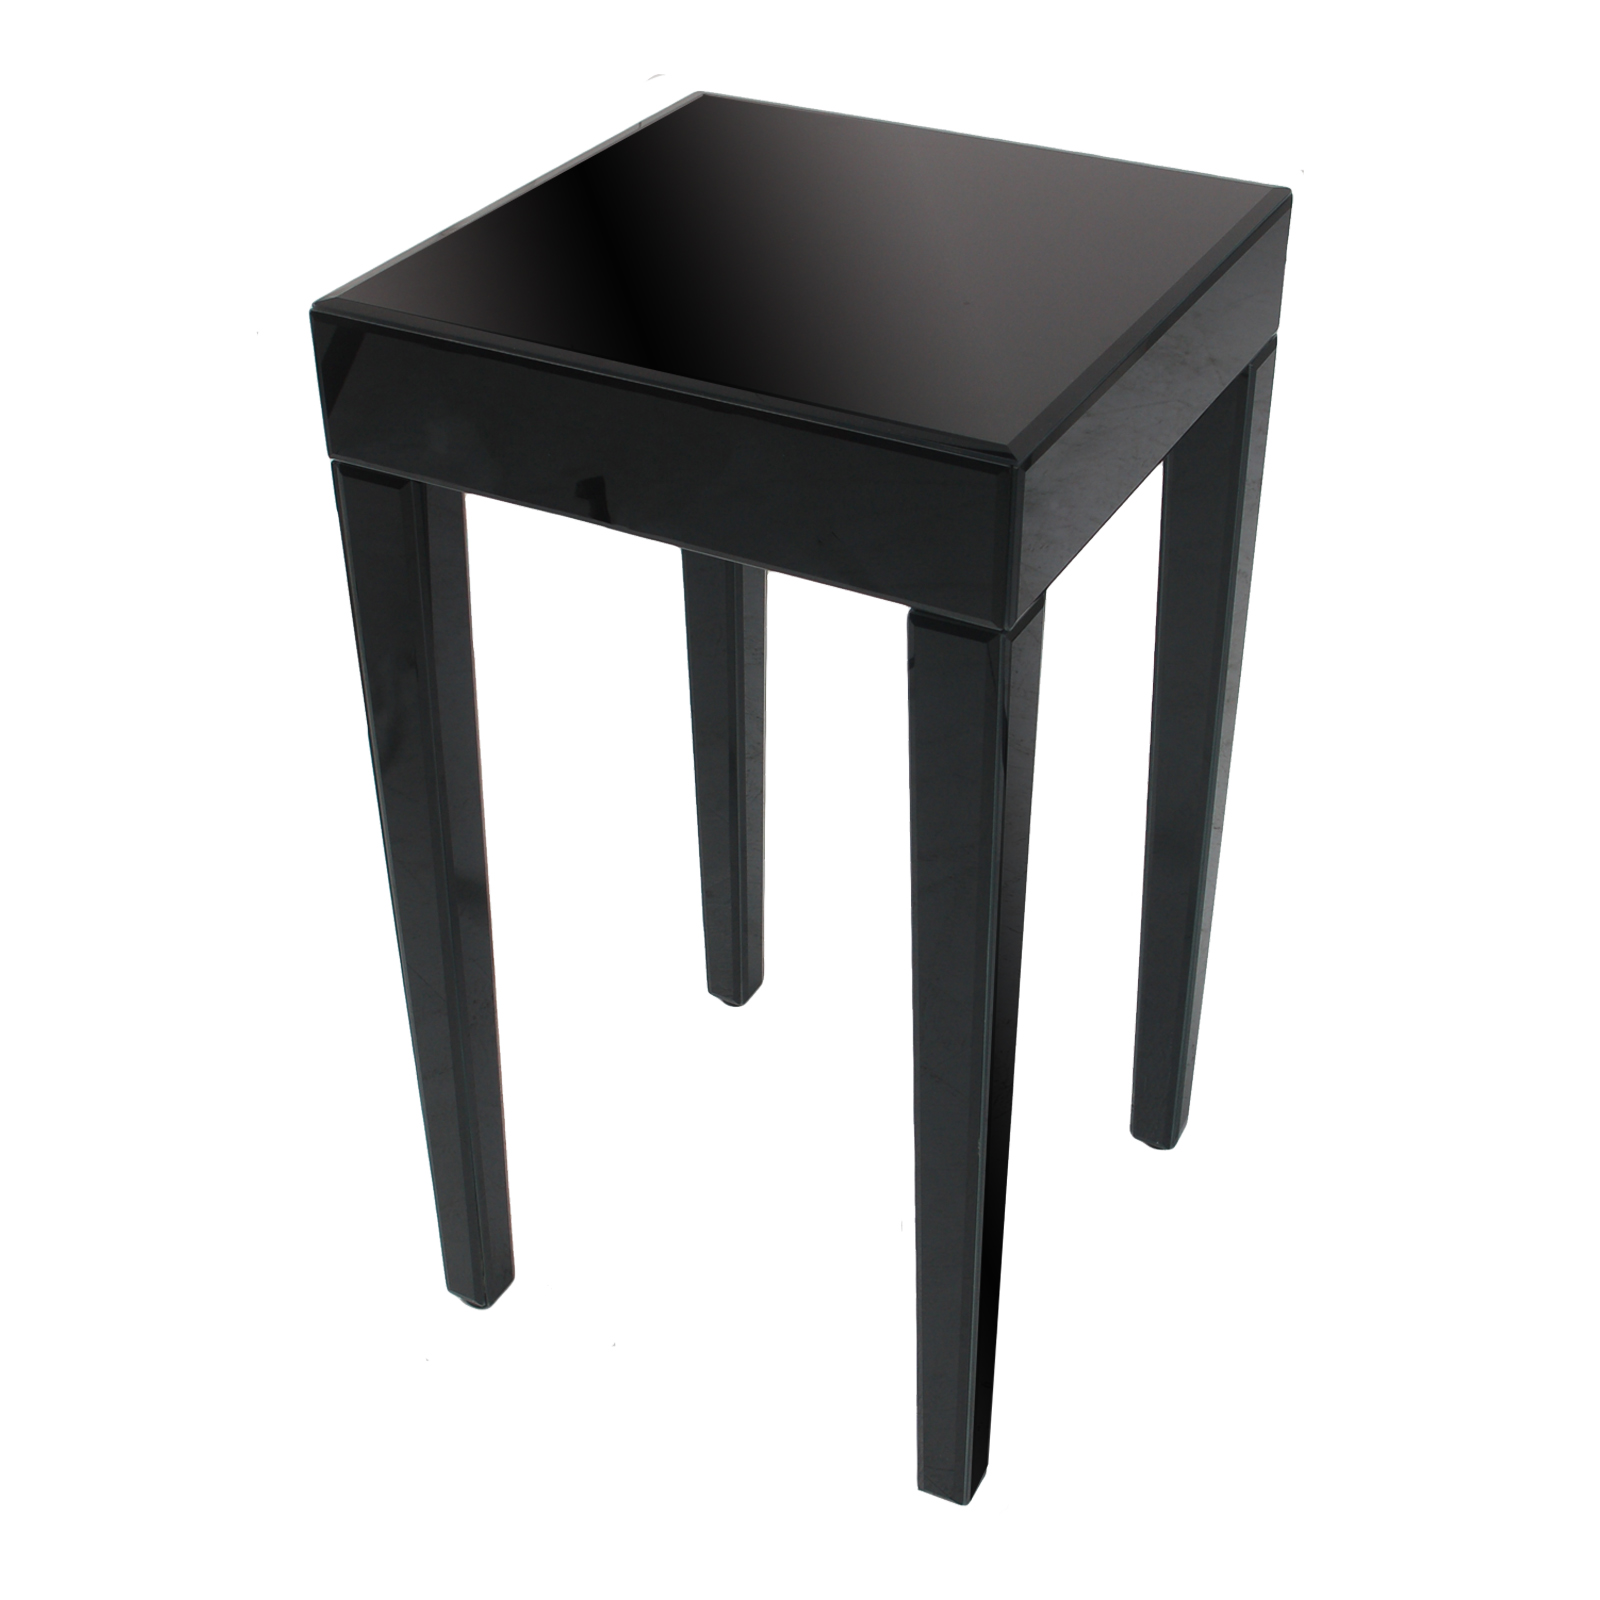 beautiful small black accent table with kitchen gorgeous uttermost creative square side four wooden legs mini red round uniqueprimtiques mahogany dining glass top end tables